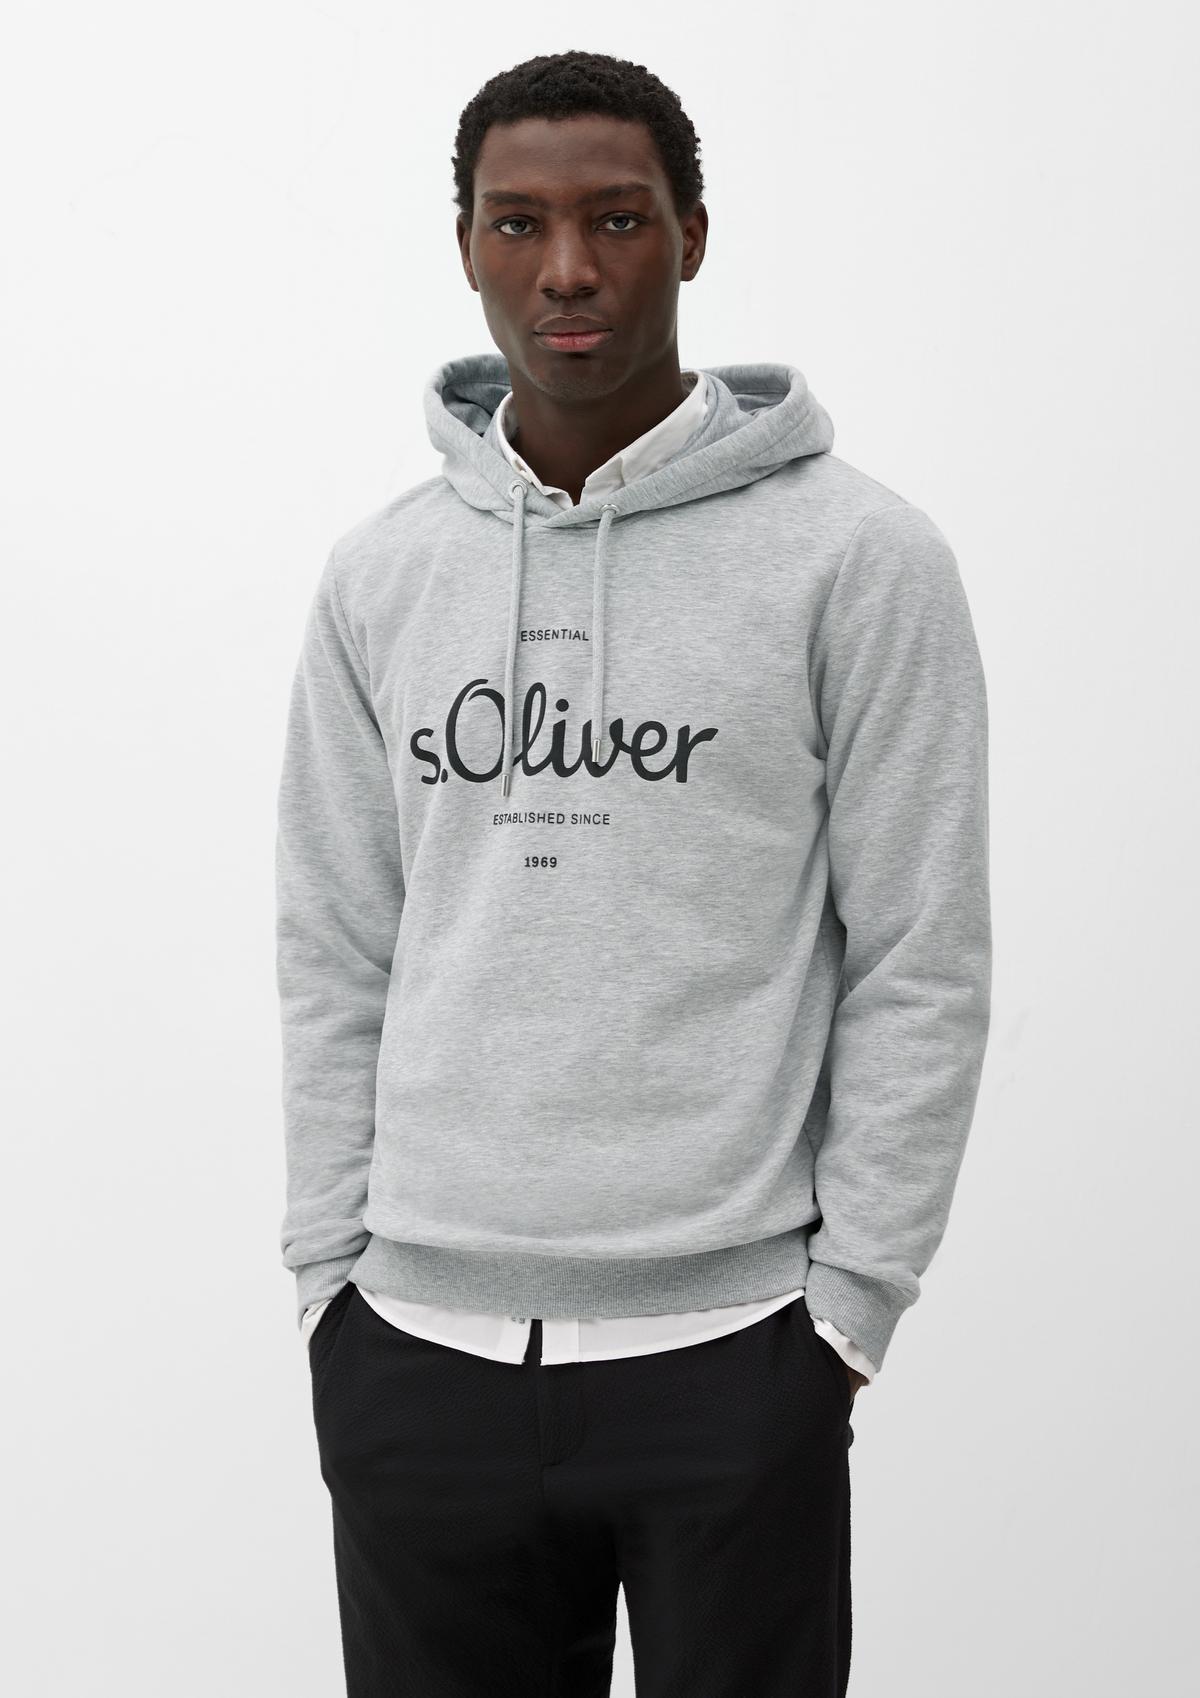 s.Oliver Hoodie with a front print